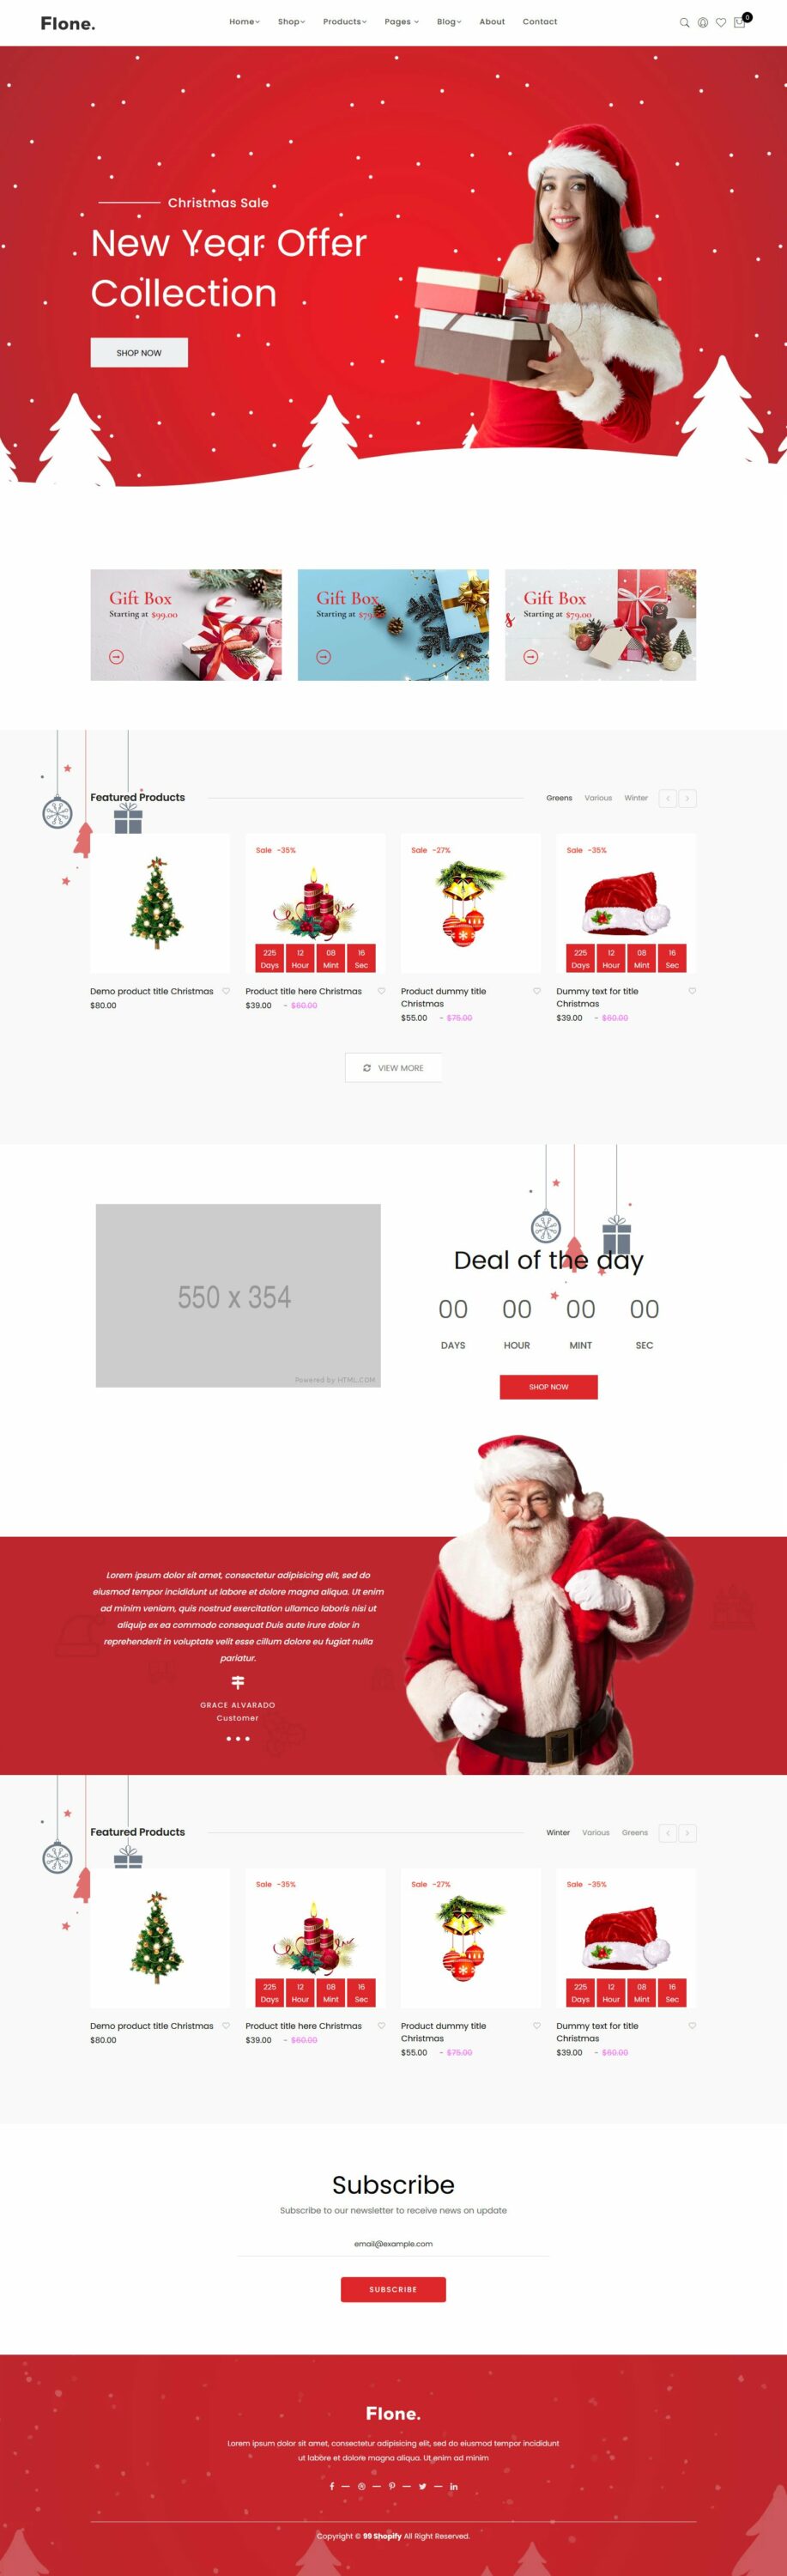 White and red template will perfect for your Christmas ad.